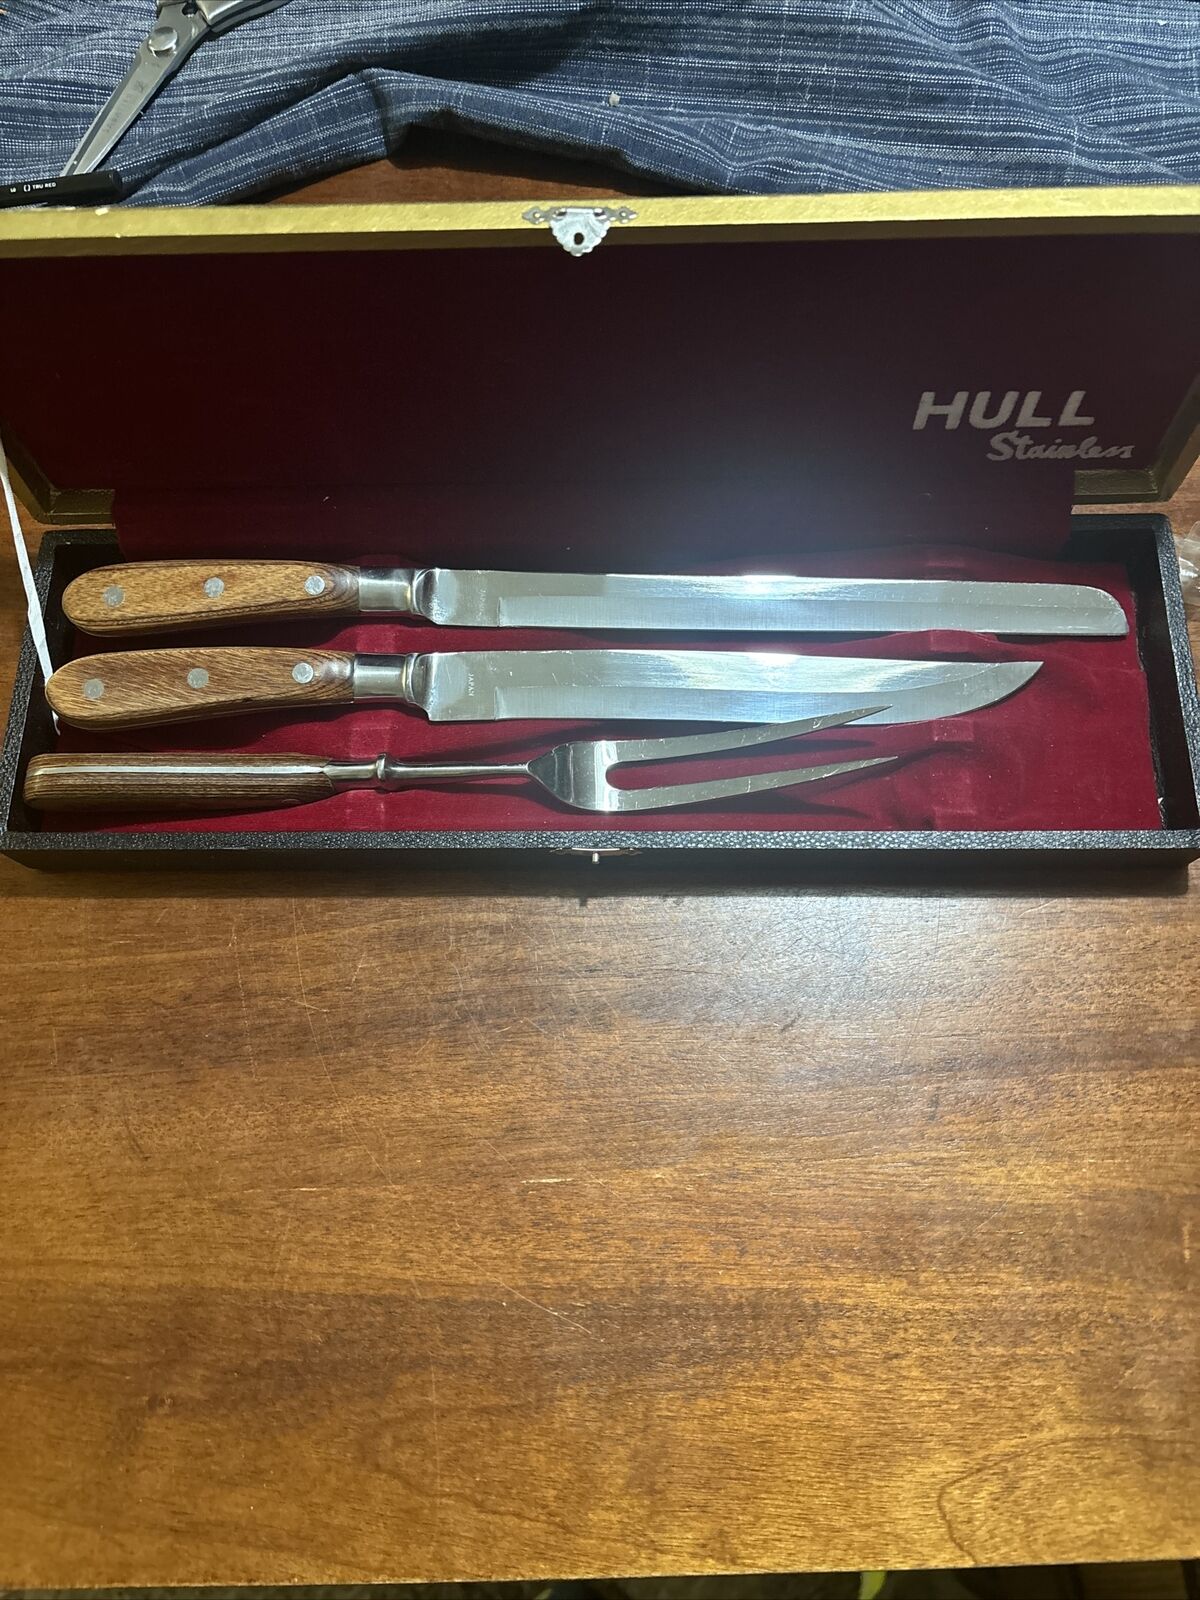 Vintage Hull Stainless 3 Piece Carving Set in Original Box